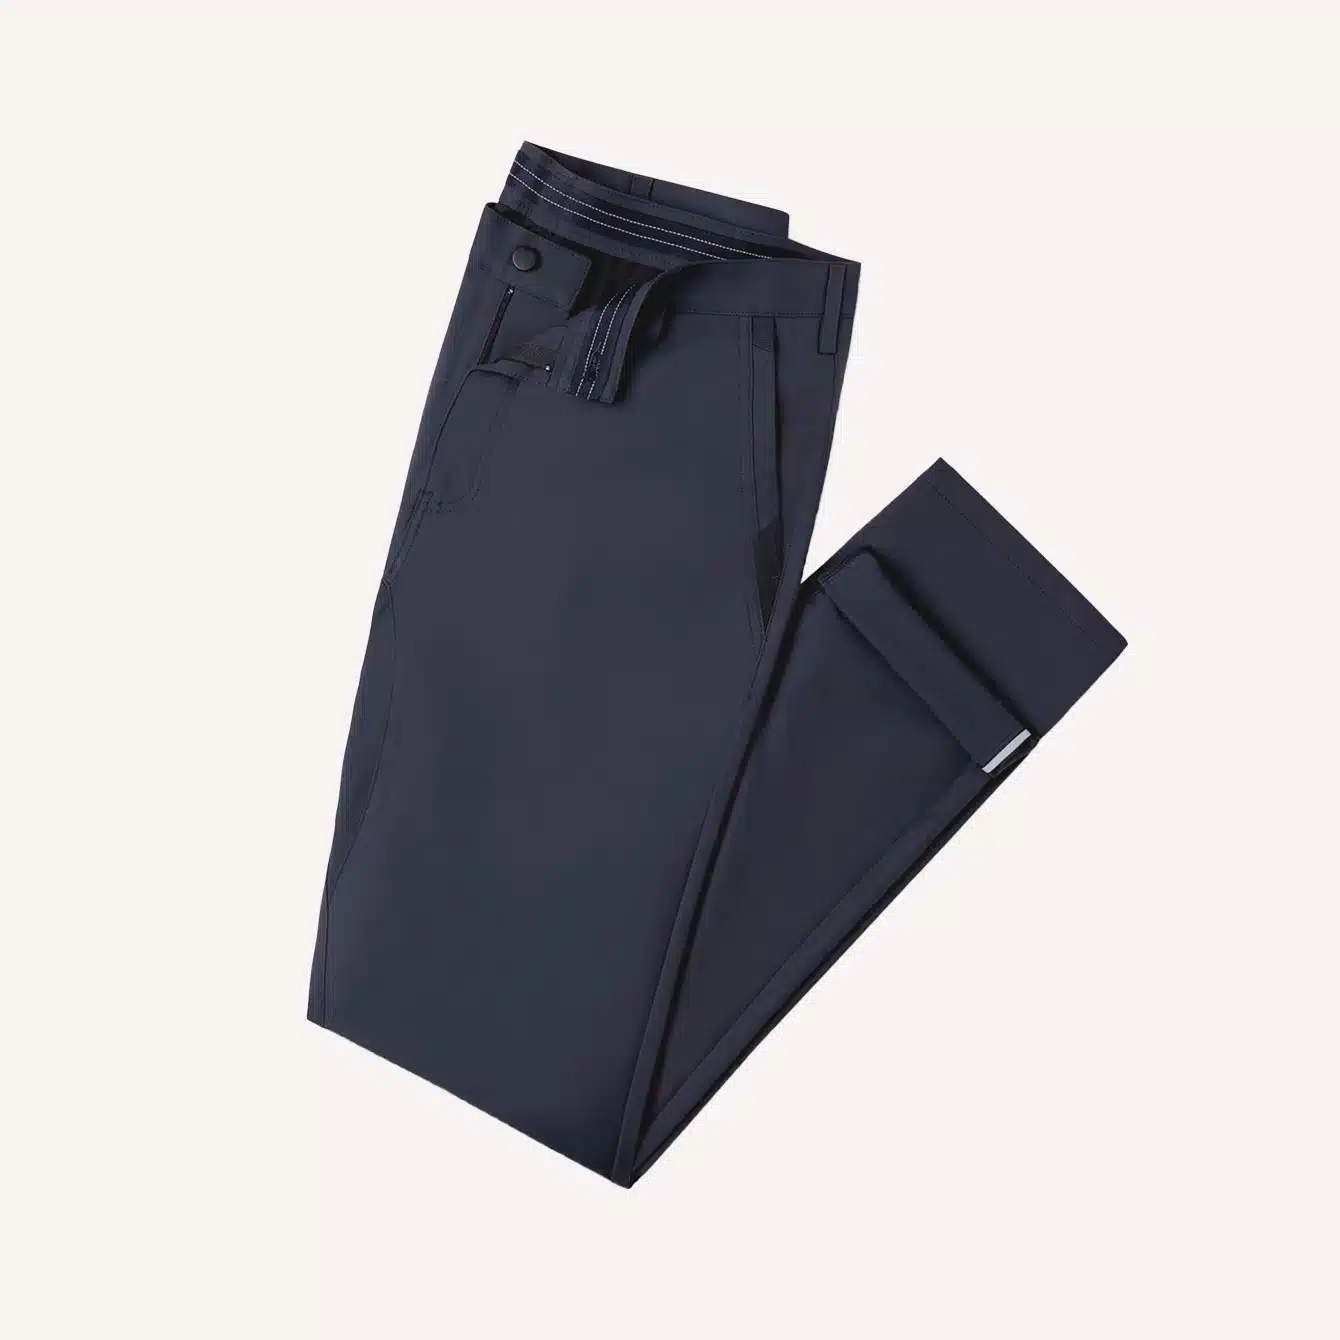 good travel pants for europe